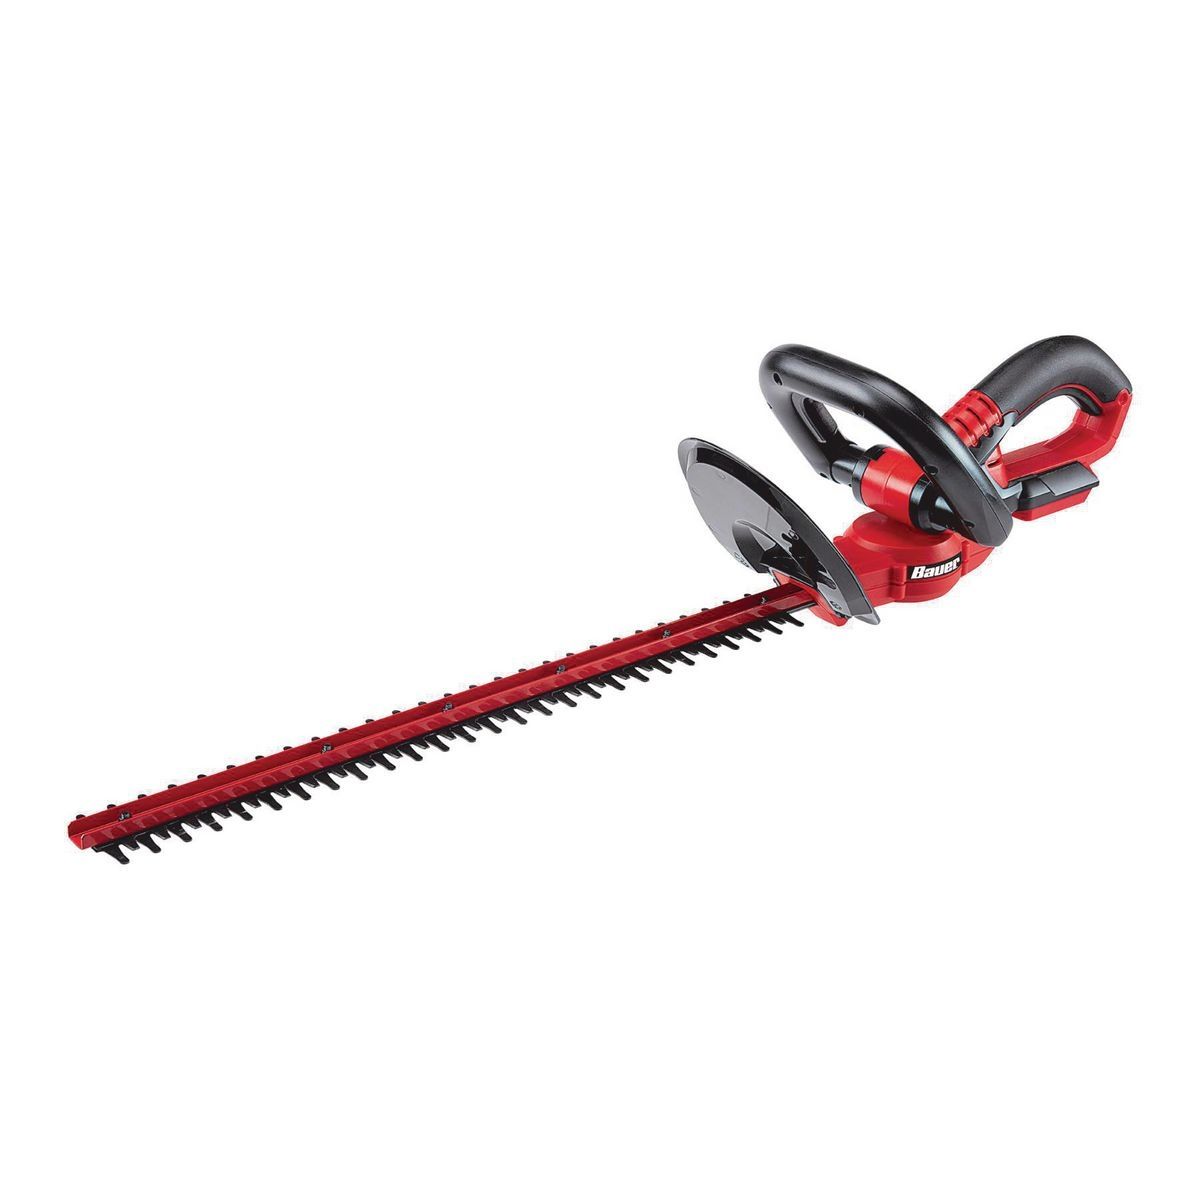 BAUER 20V Cordless Hedge Trimmer - Tool Only